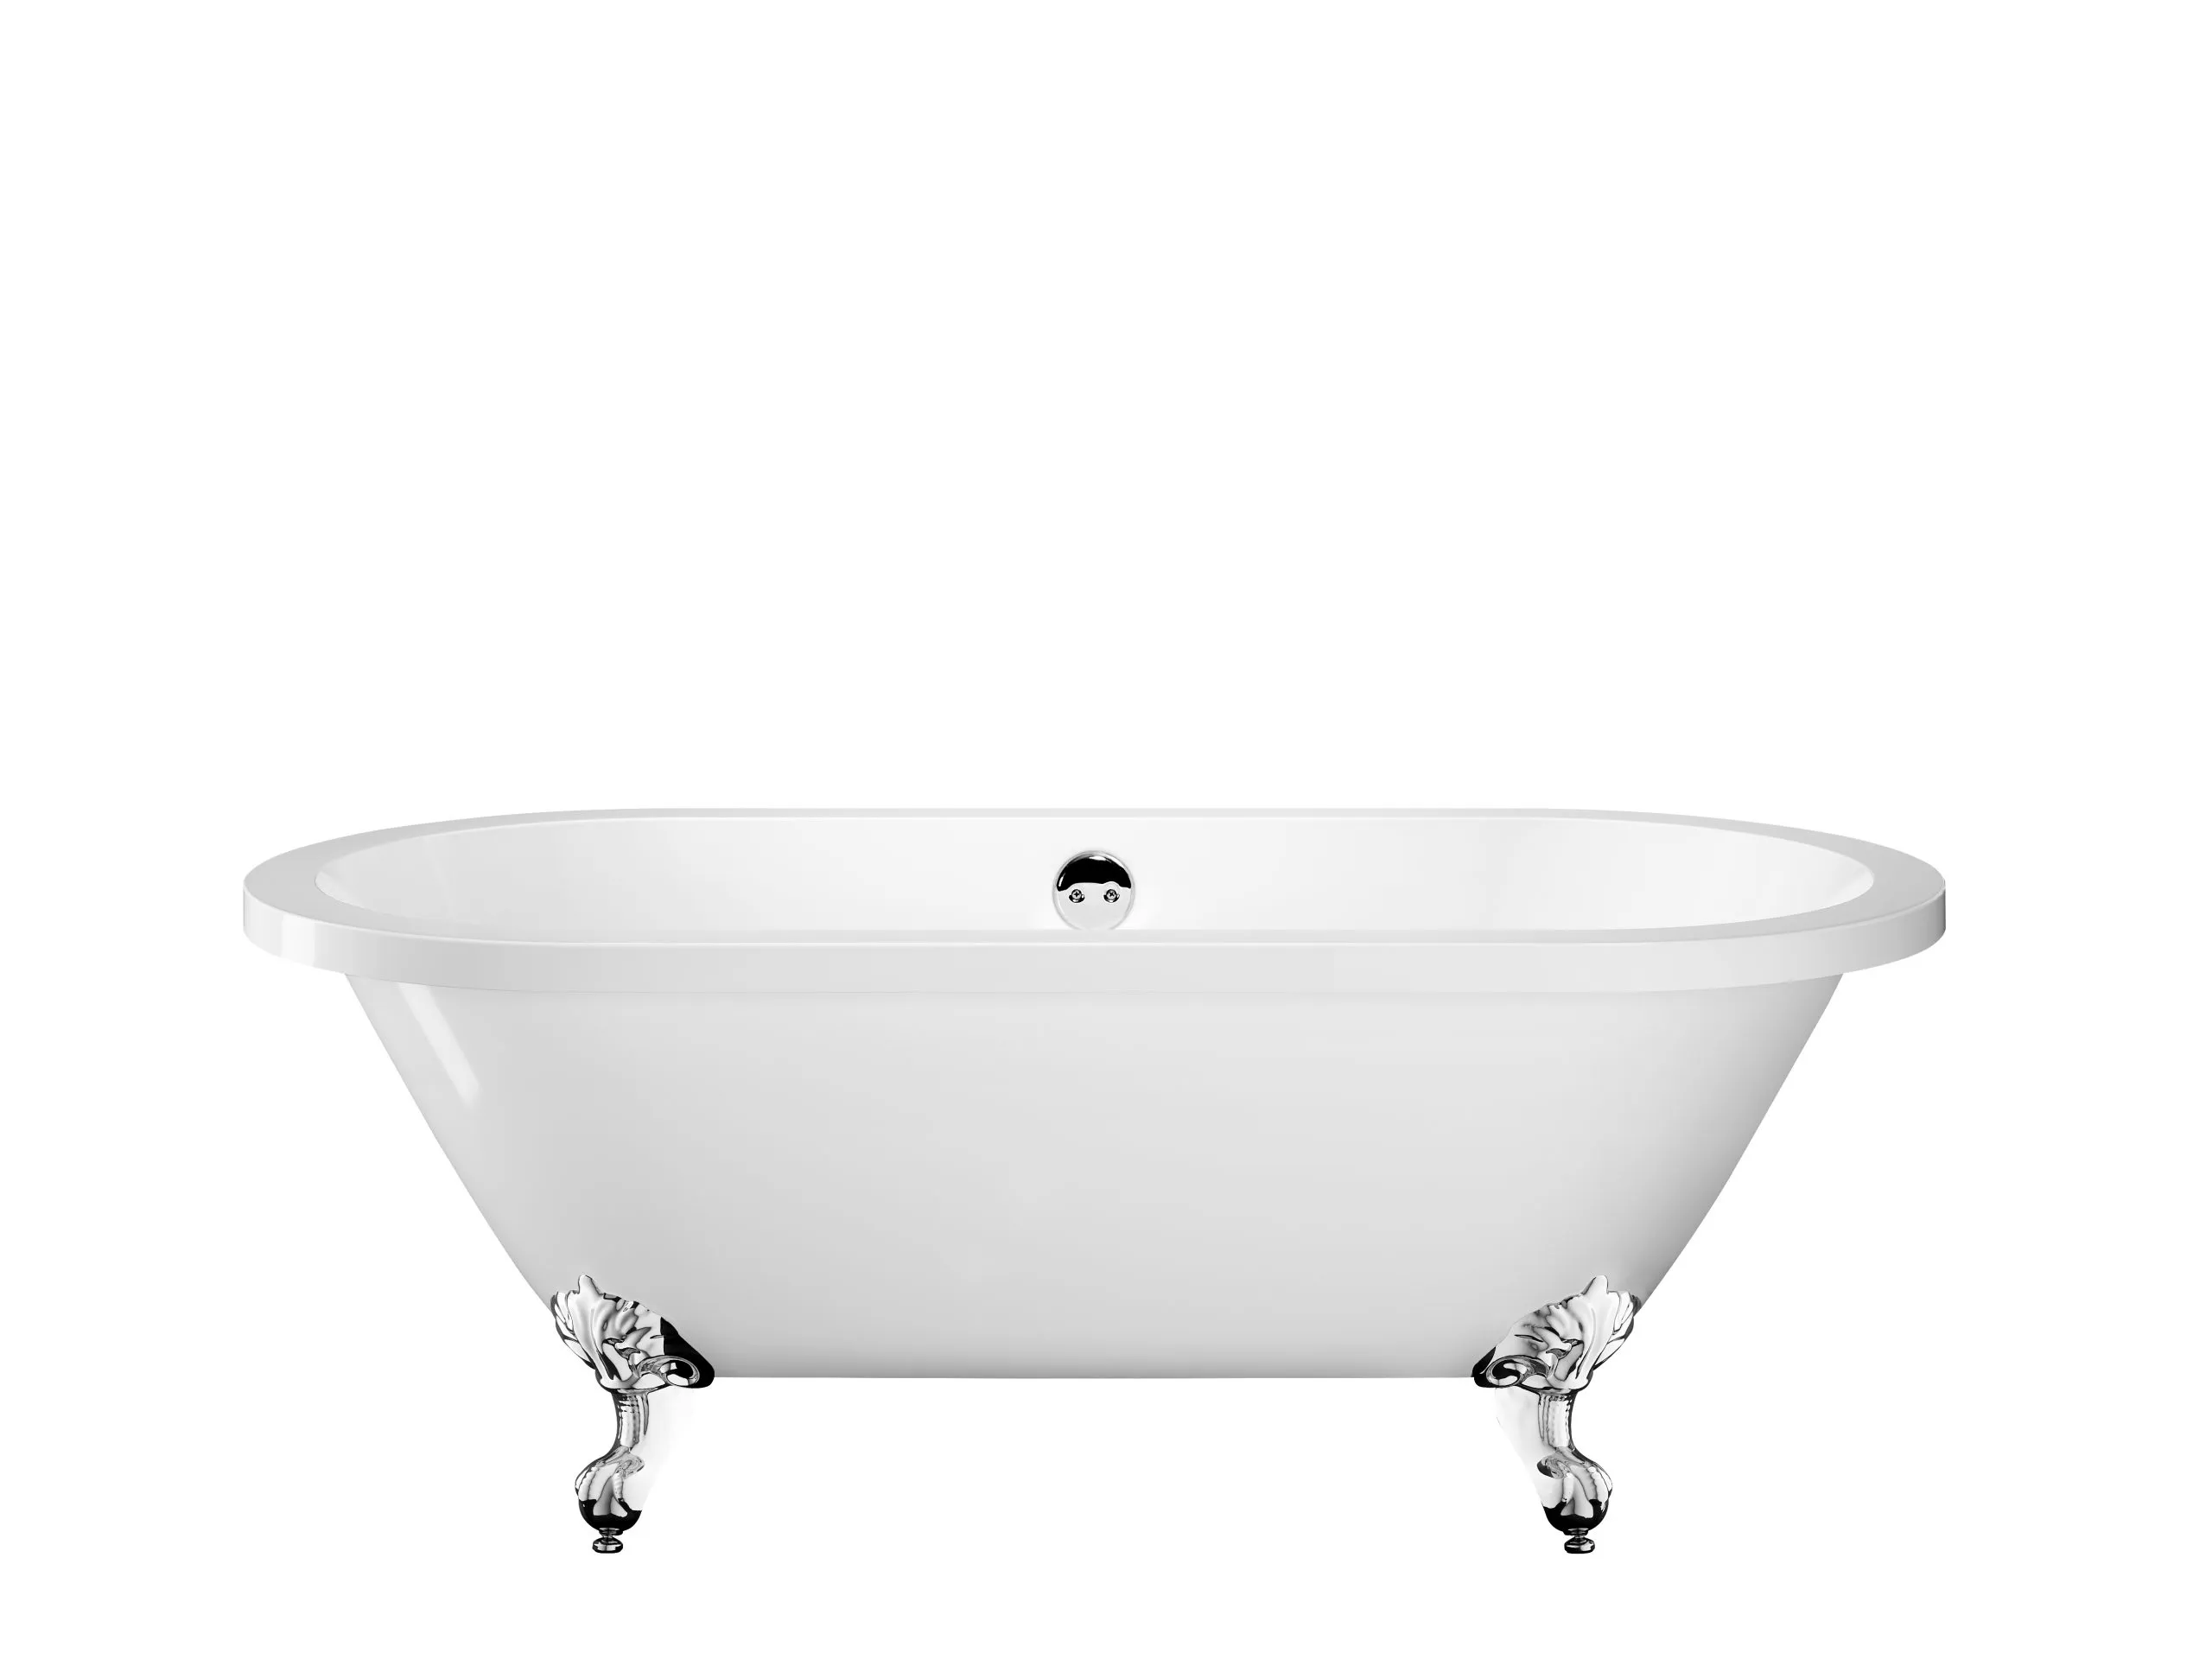 Frequently Asked Questions:Can jets be installed in a clawfoot tub?